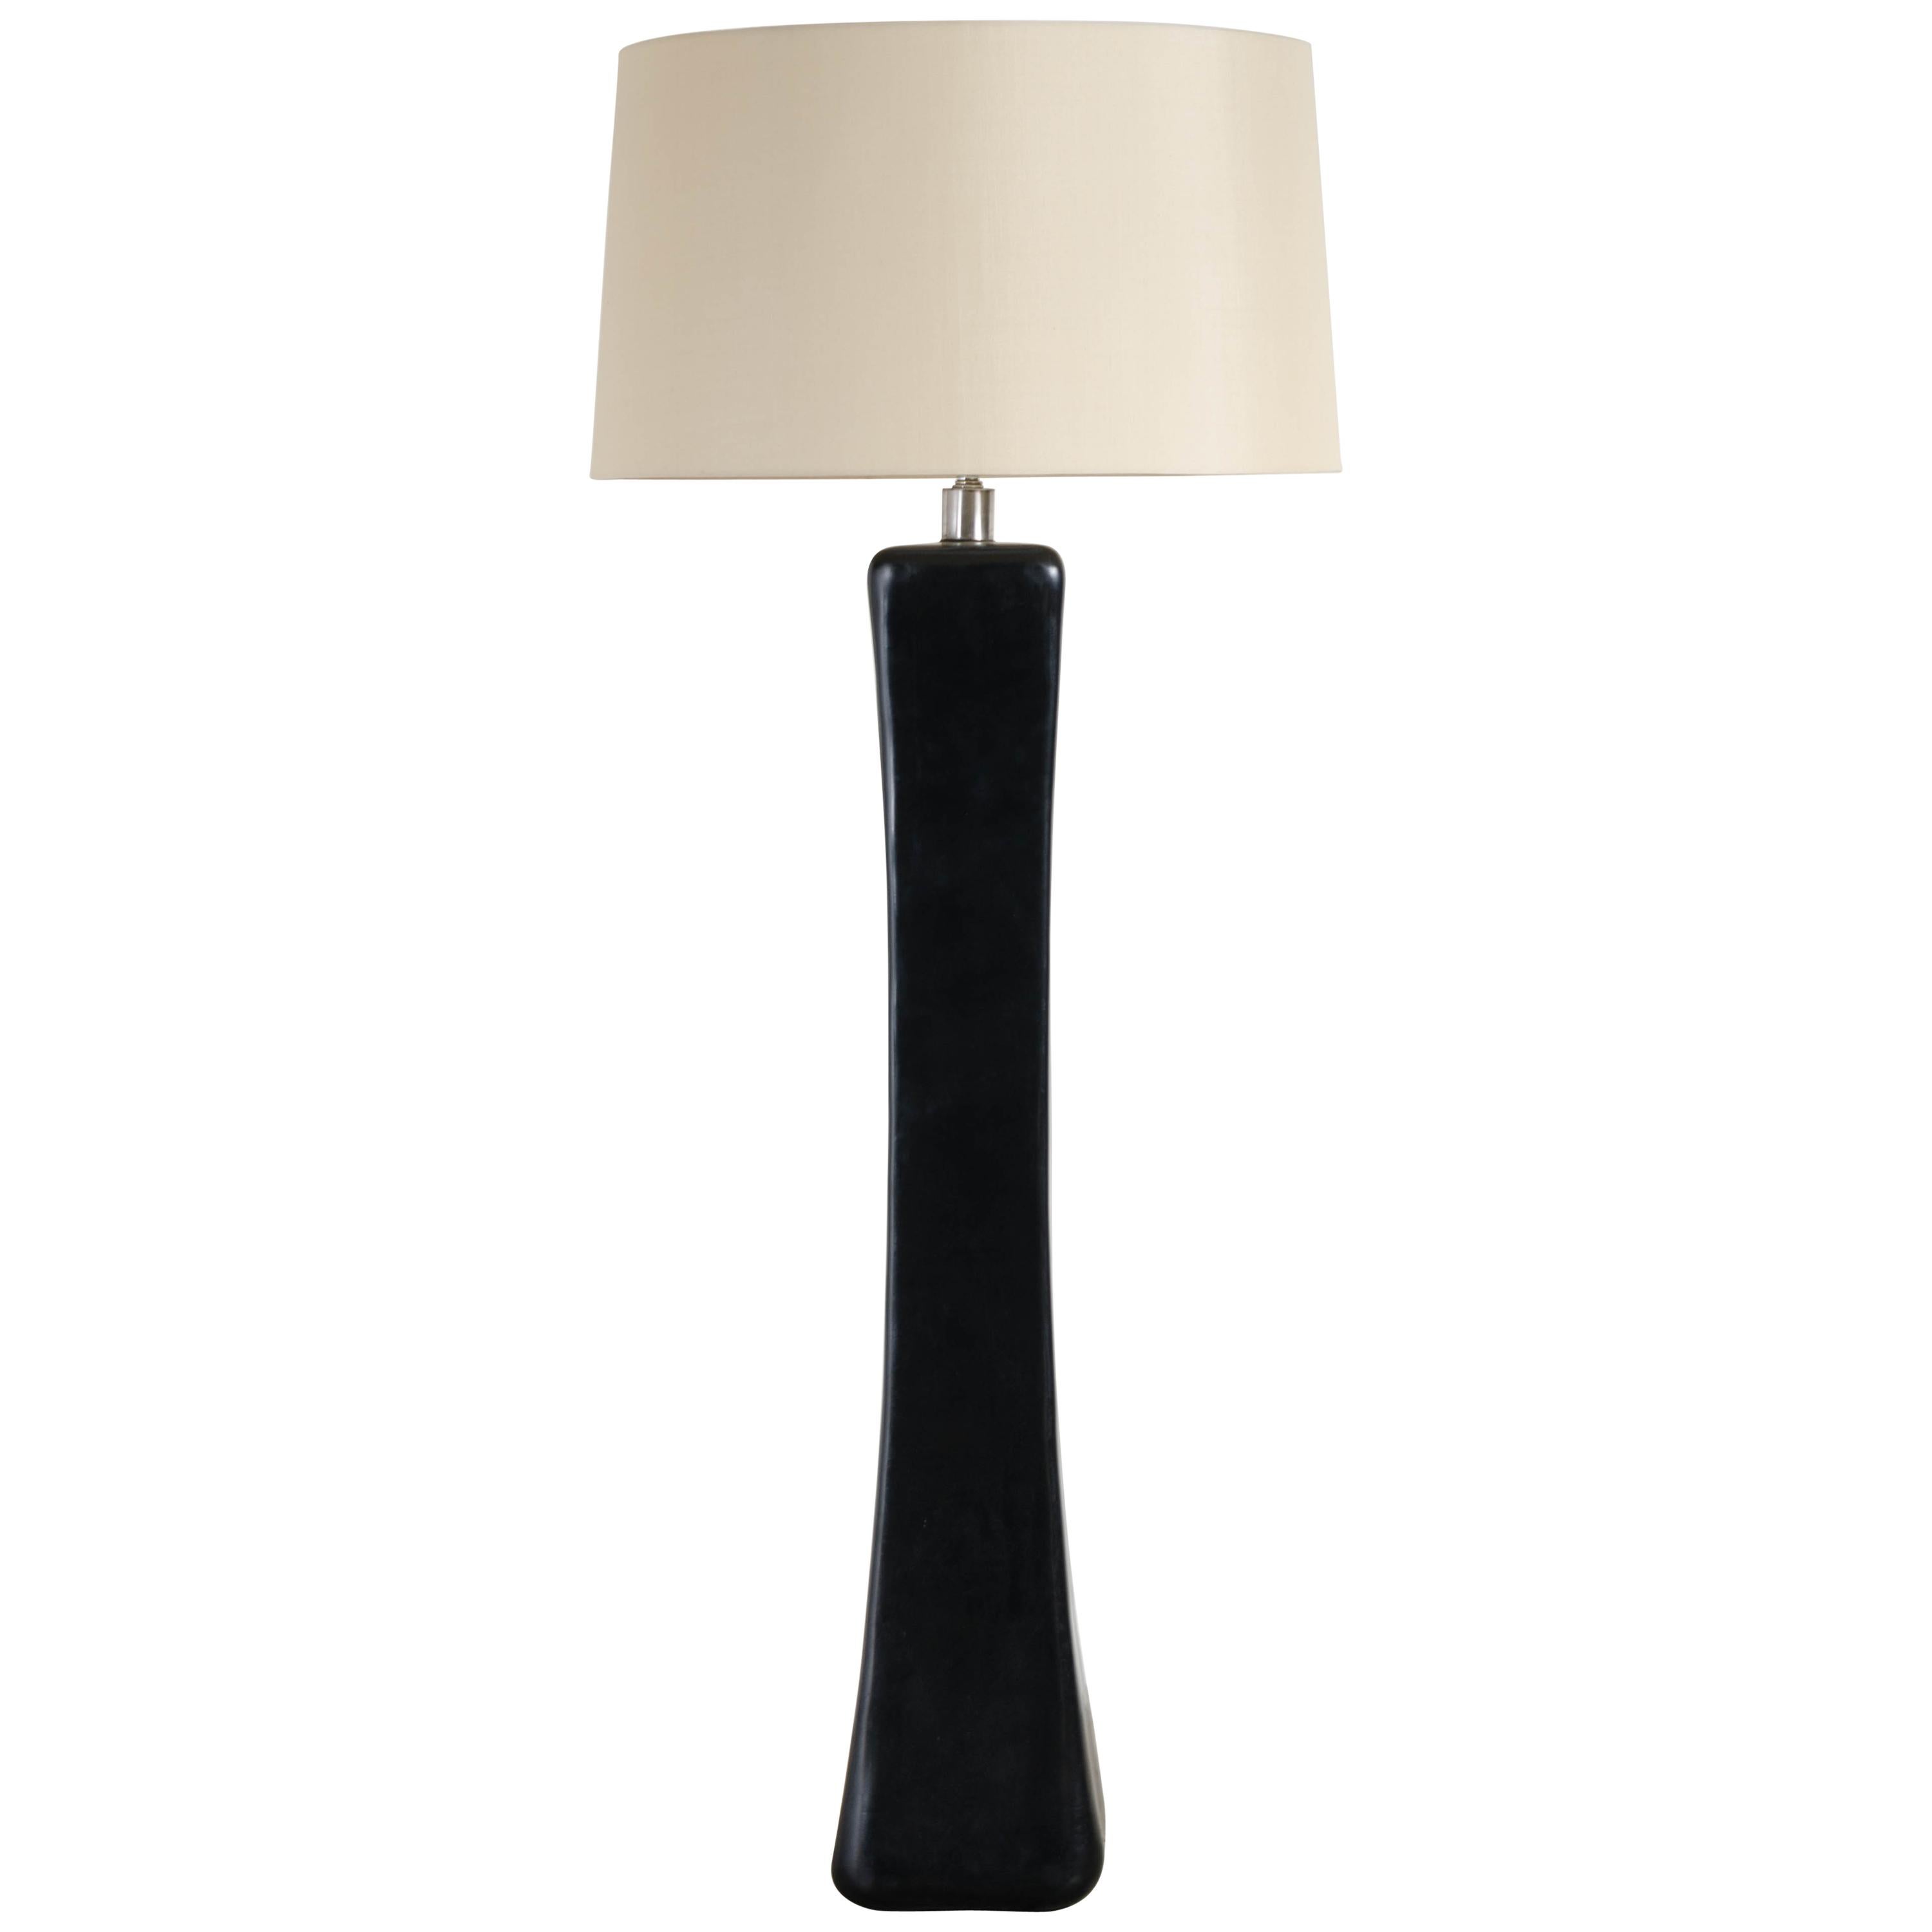 Pillow Floor Lamp, Black Lacquer by Robert Kuo, Handmade, Limited Edition For Sale